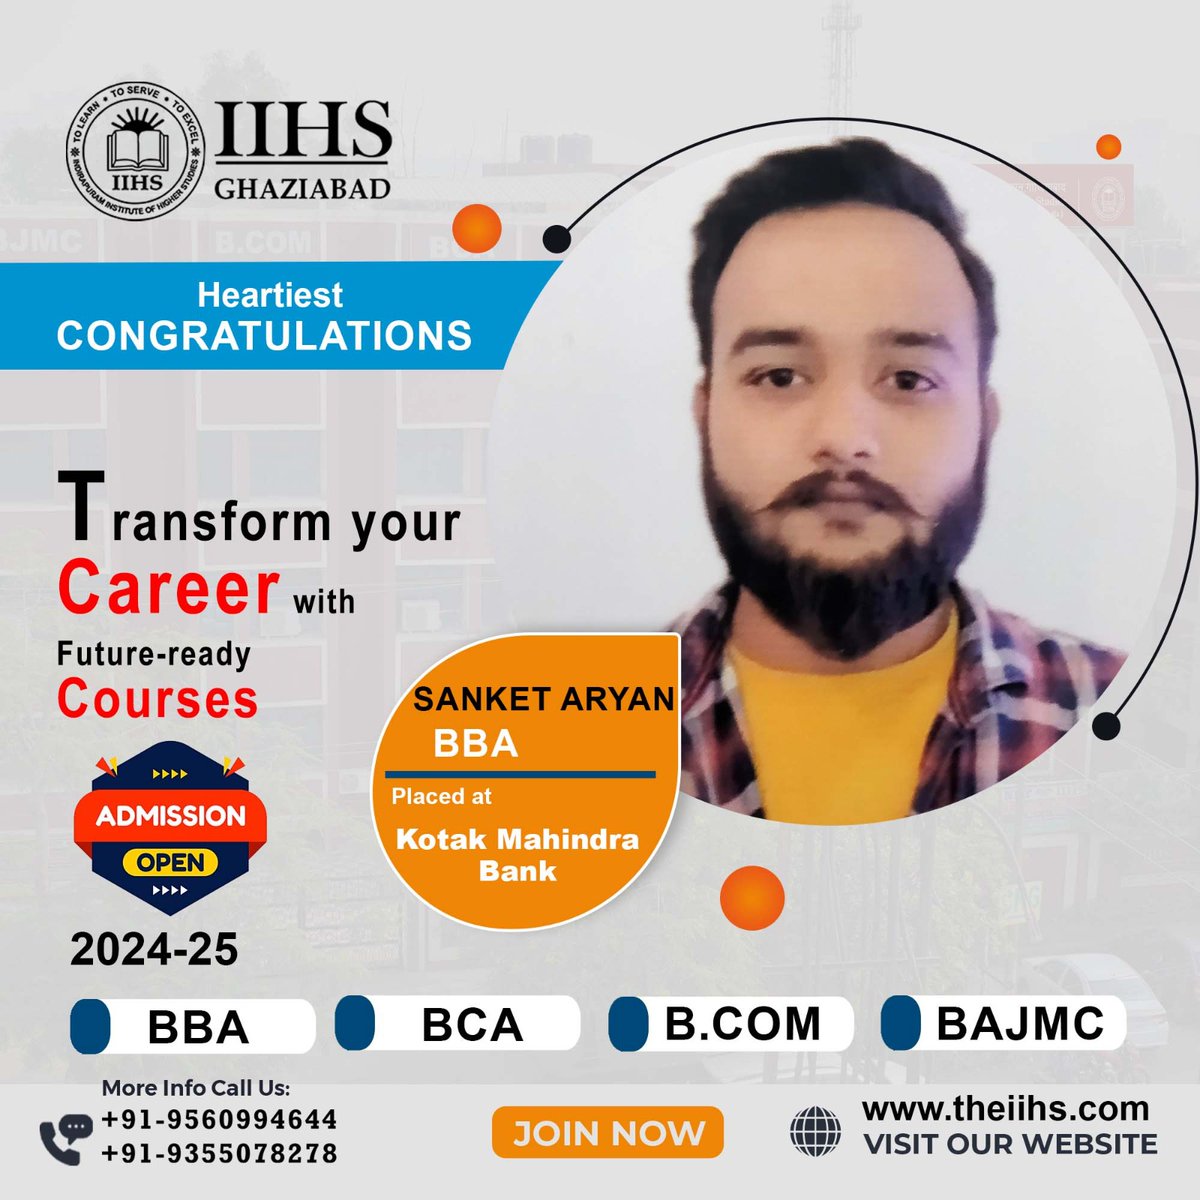 Heartiest Congratultion
.
.
.
.
.

#bjmc #journalism #mjmc #bba #admissionopen #bca #admissions #media #communication #bestprivatecollege #admission #masscommunications #college #bestcollegeinghaziabad #masscommunication #students